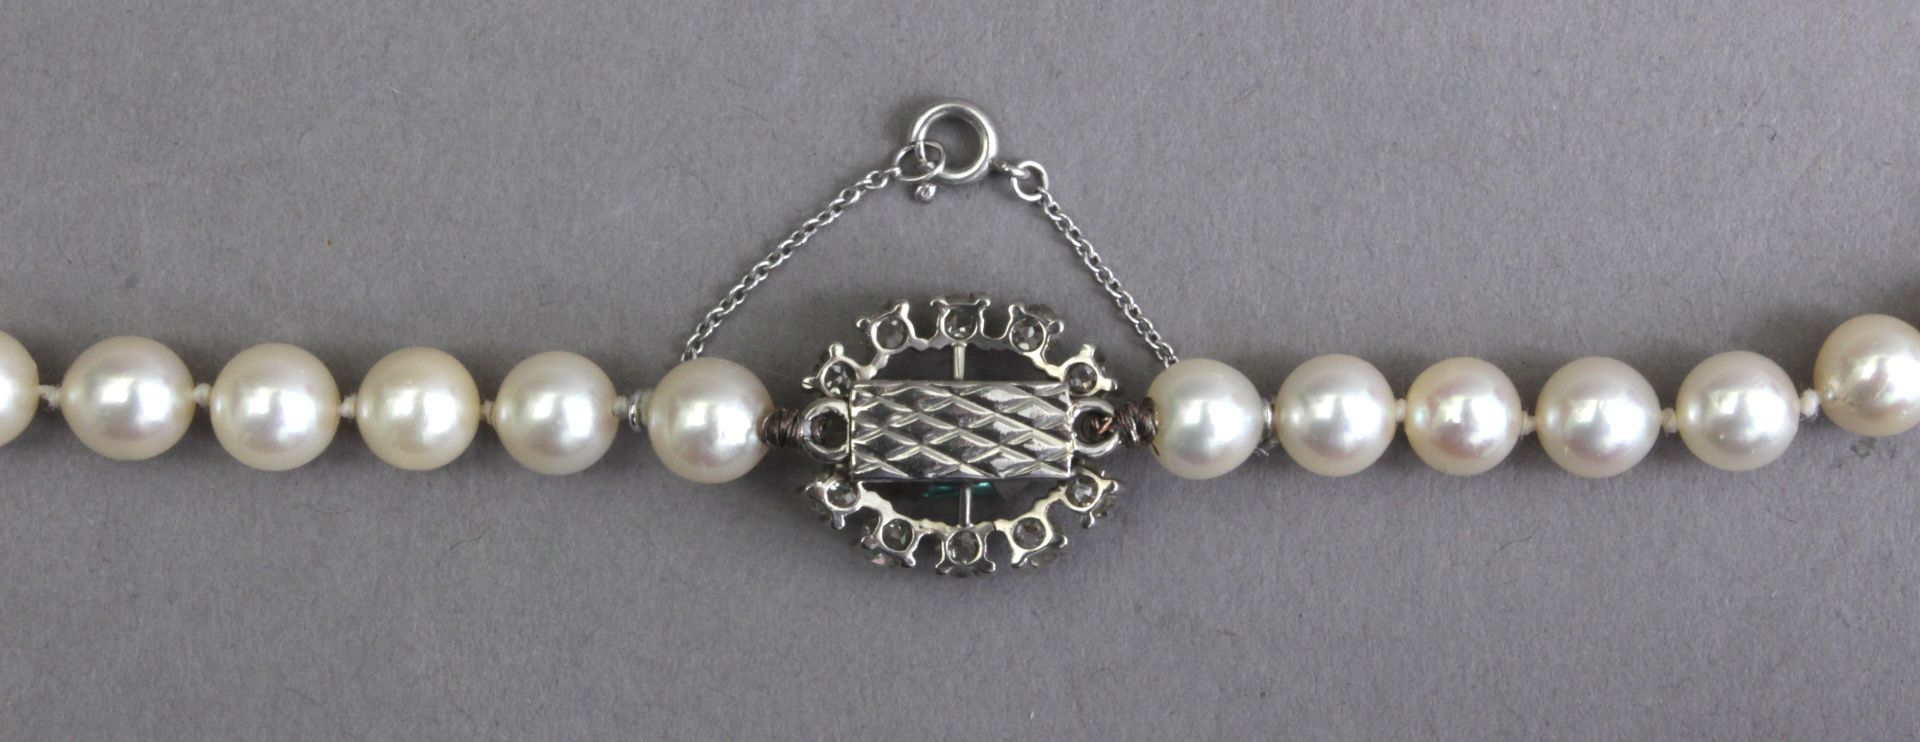 A cultured pearls necklace with a brooch clasp in 18k. white gold, emerald and diamonds - Image 4 of 4